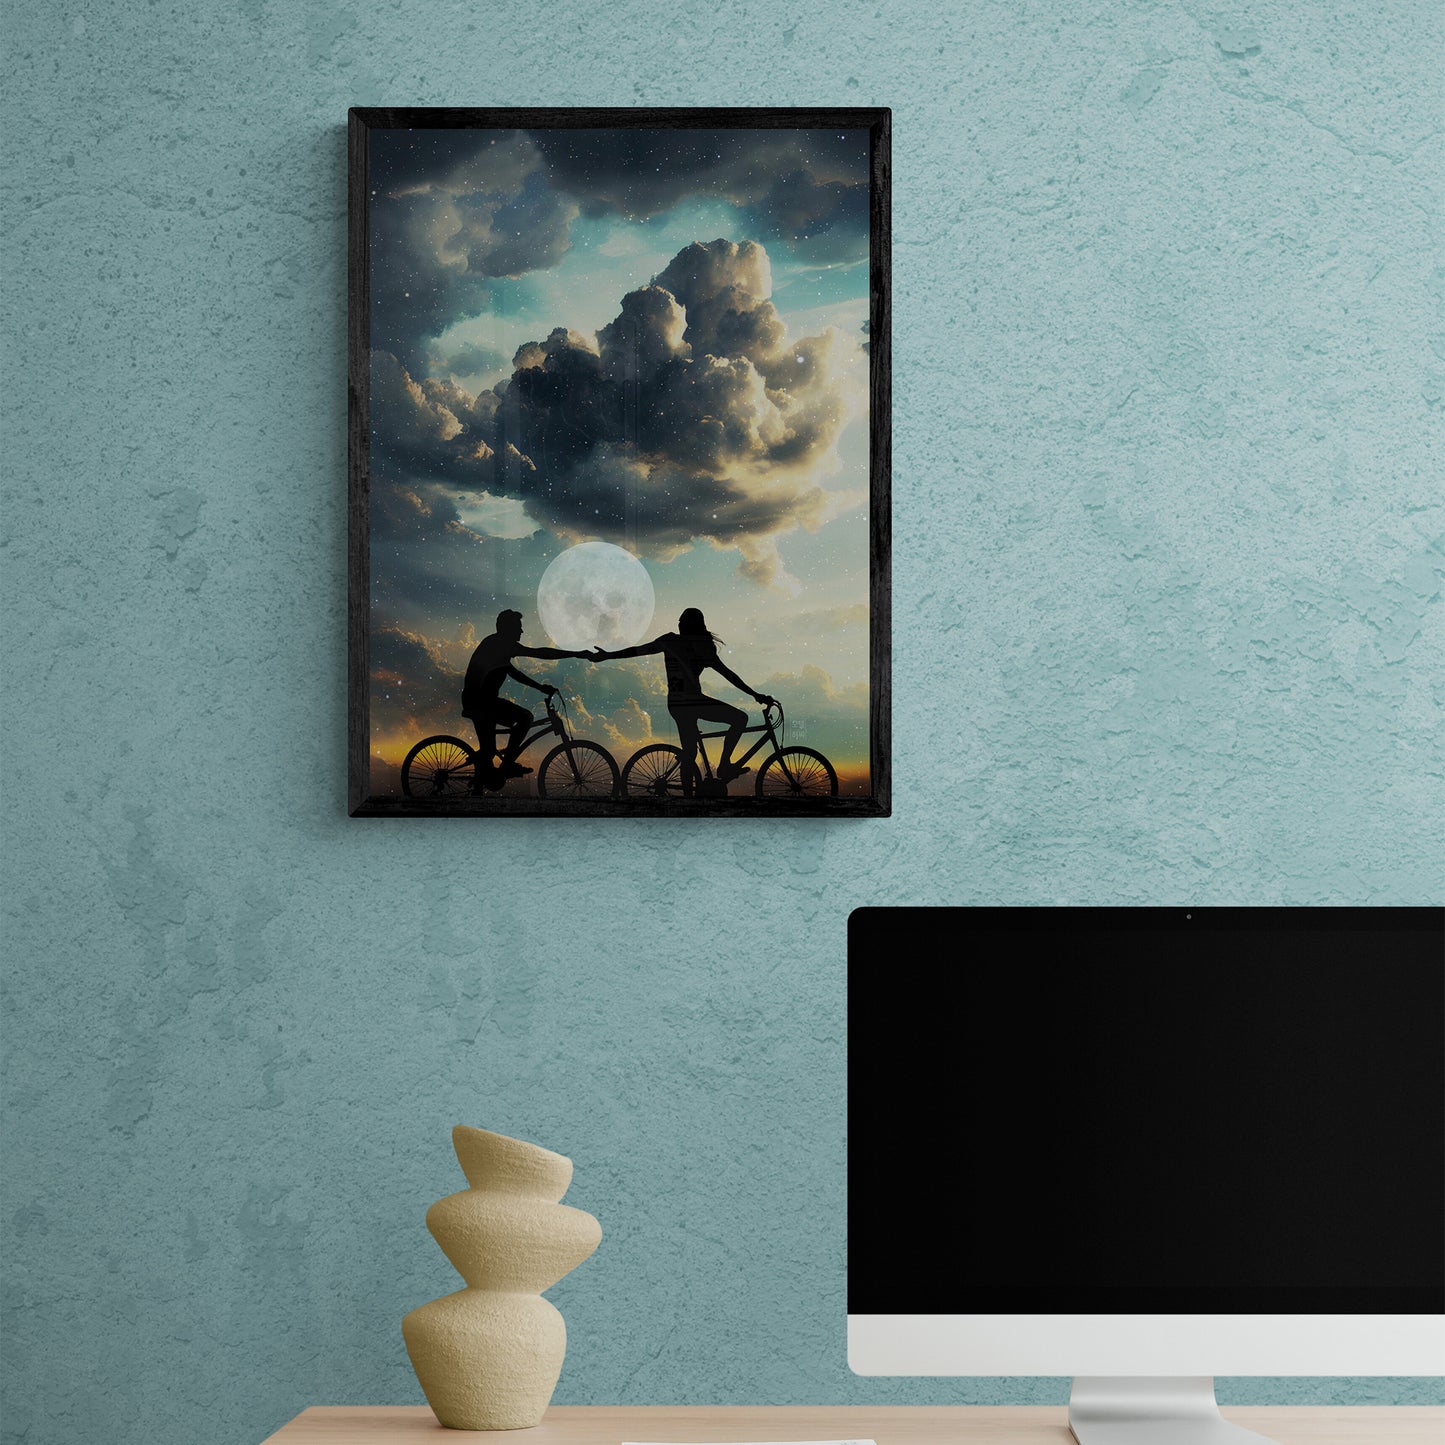 Moon Lovers Ride 18X24 Inch Poster Print for Space Art & Moon fans, great gift for home decor and room design.